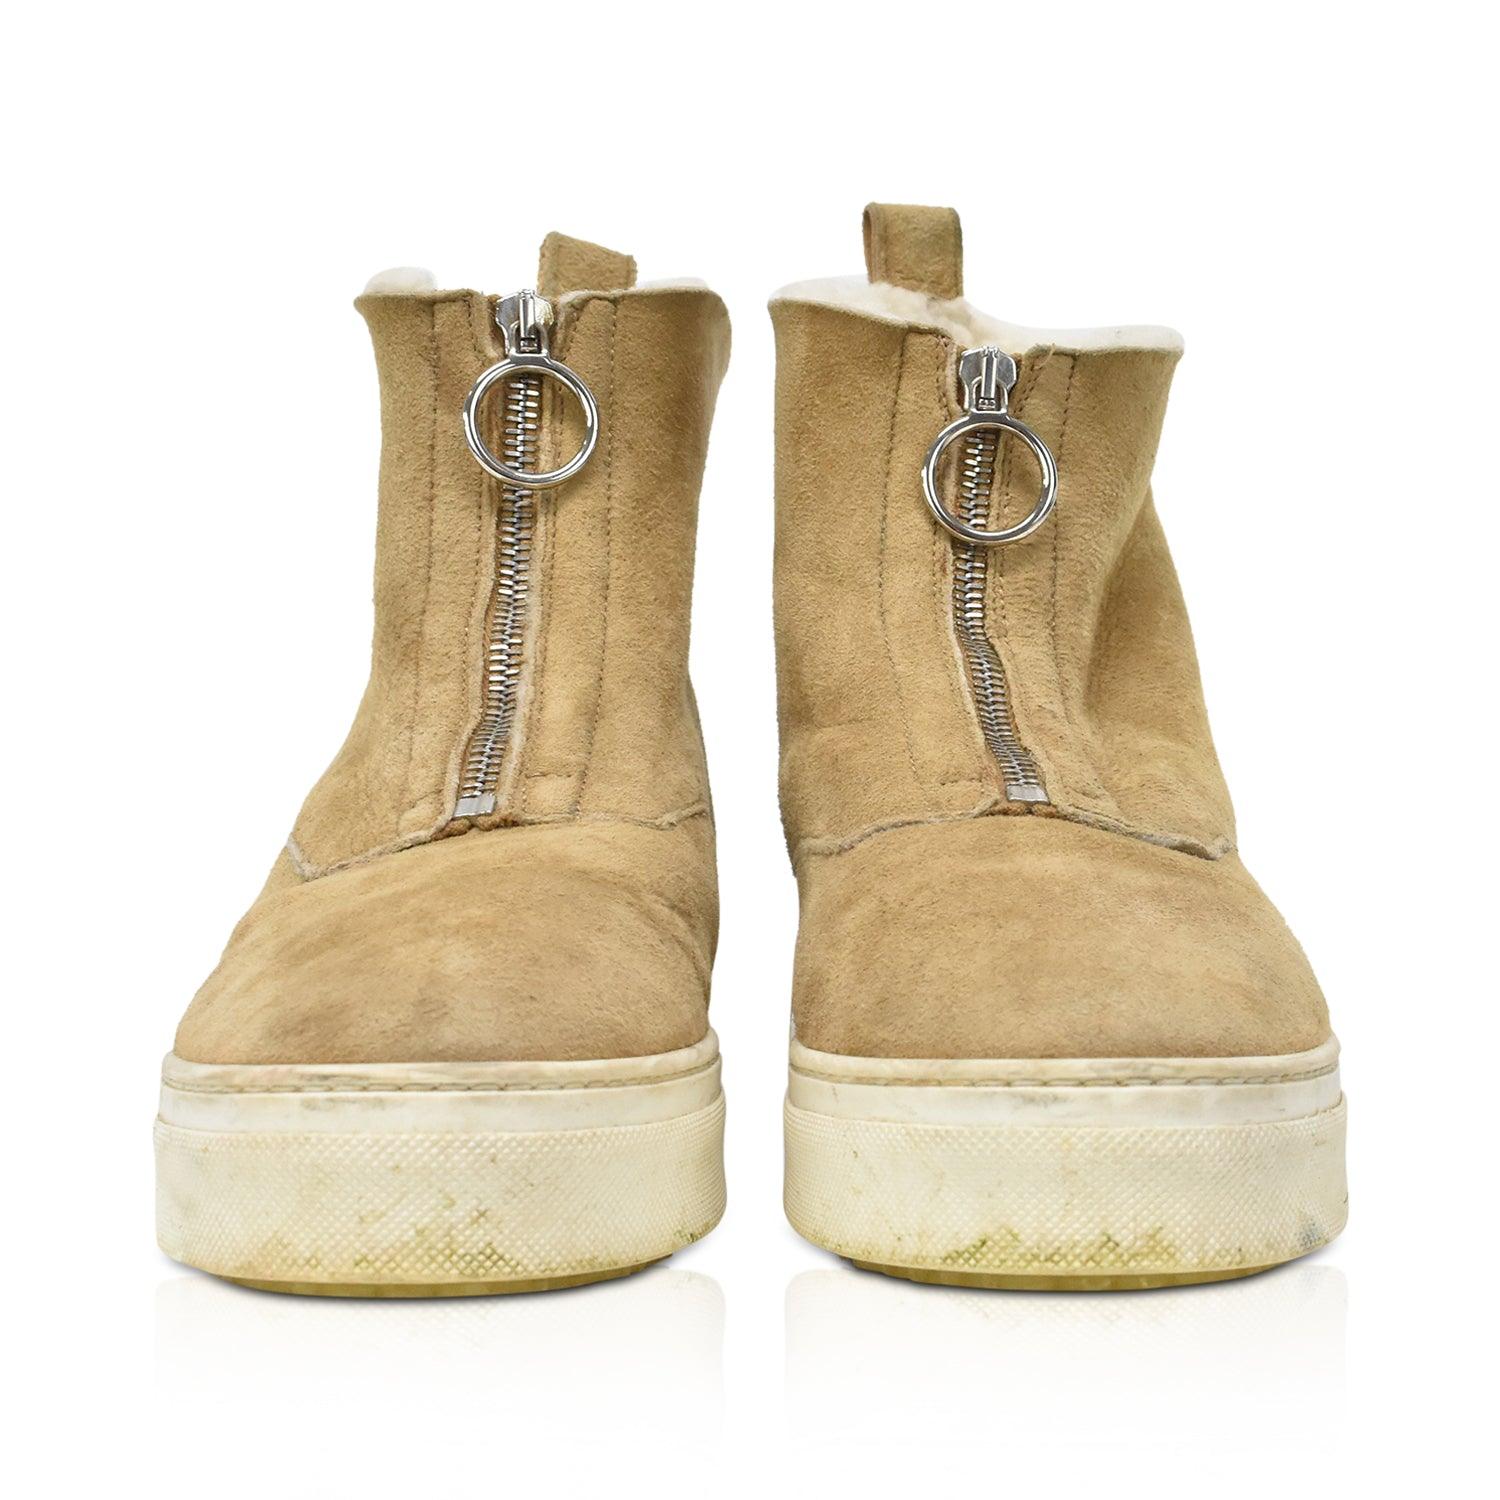 Celine Shearling Boots - Women's 37 - Fashionably Yours